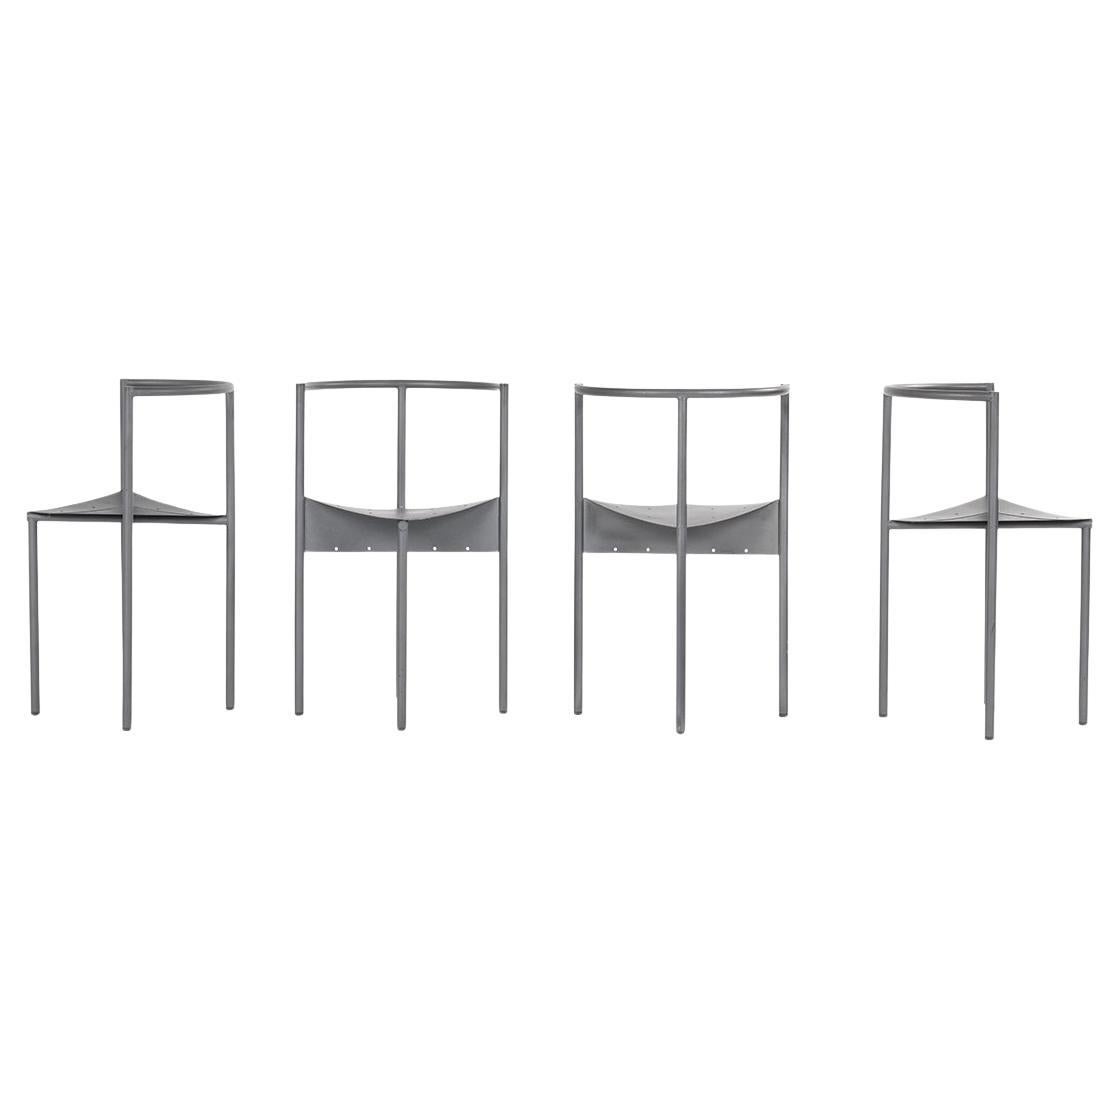 Set of 4 Wendy Wright chairs by Philippe Starck for Disform 1986